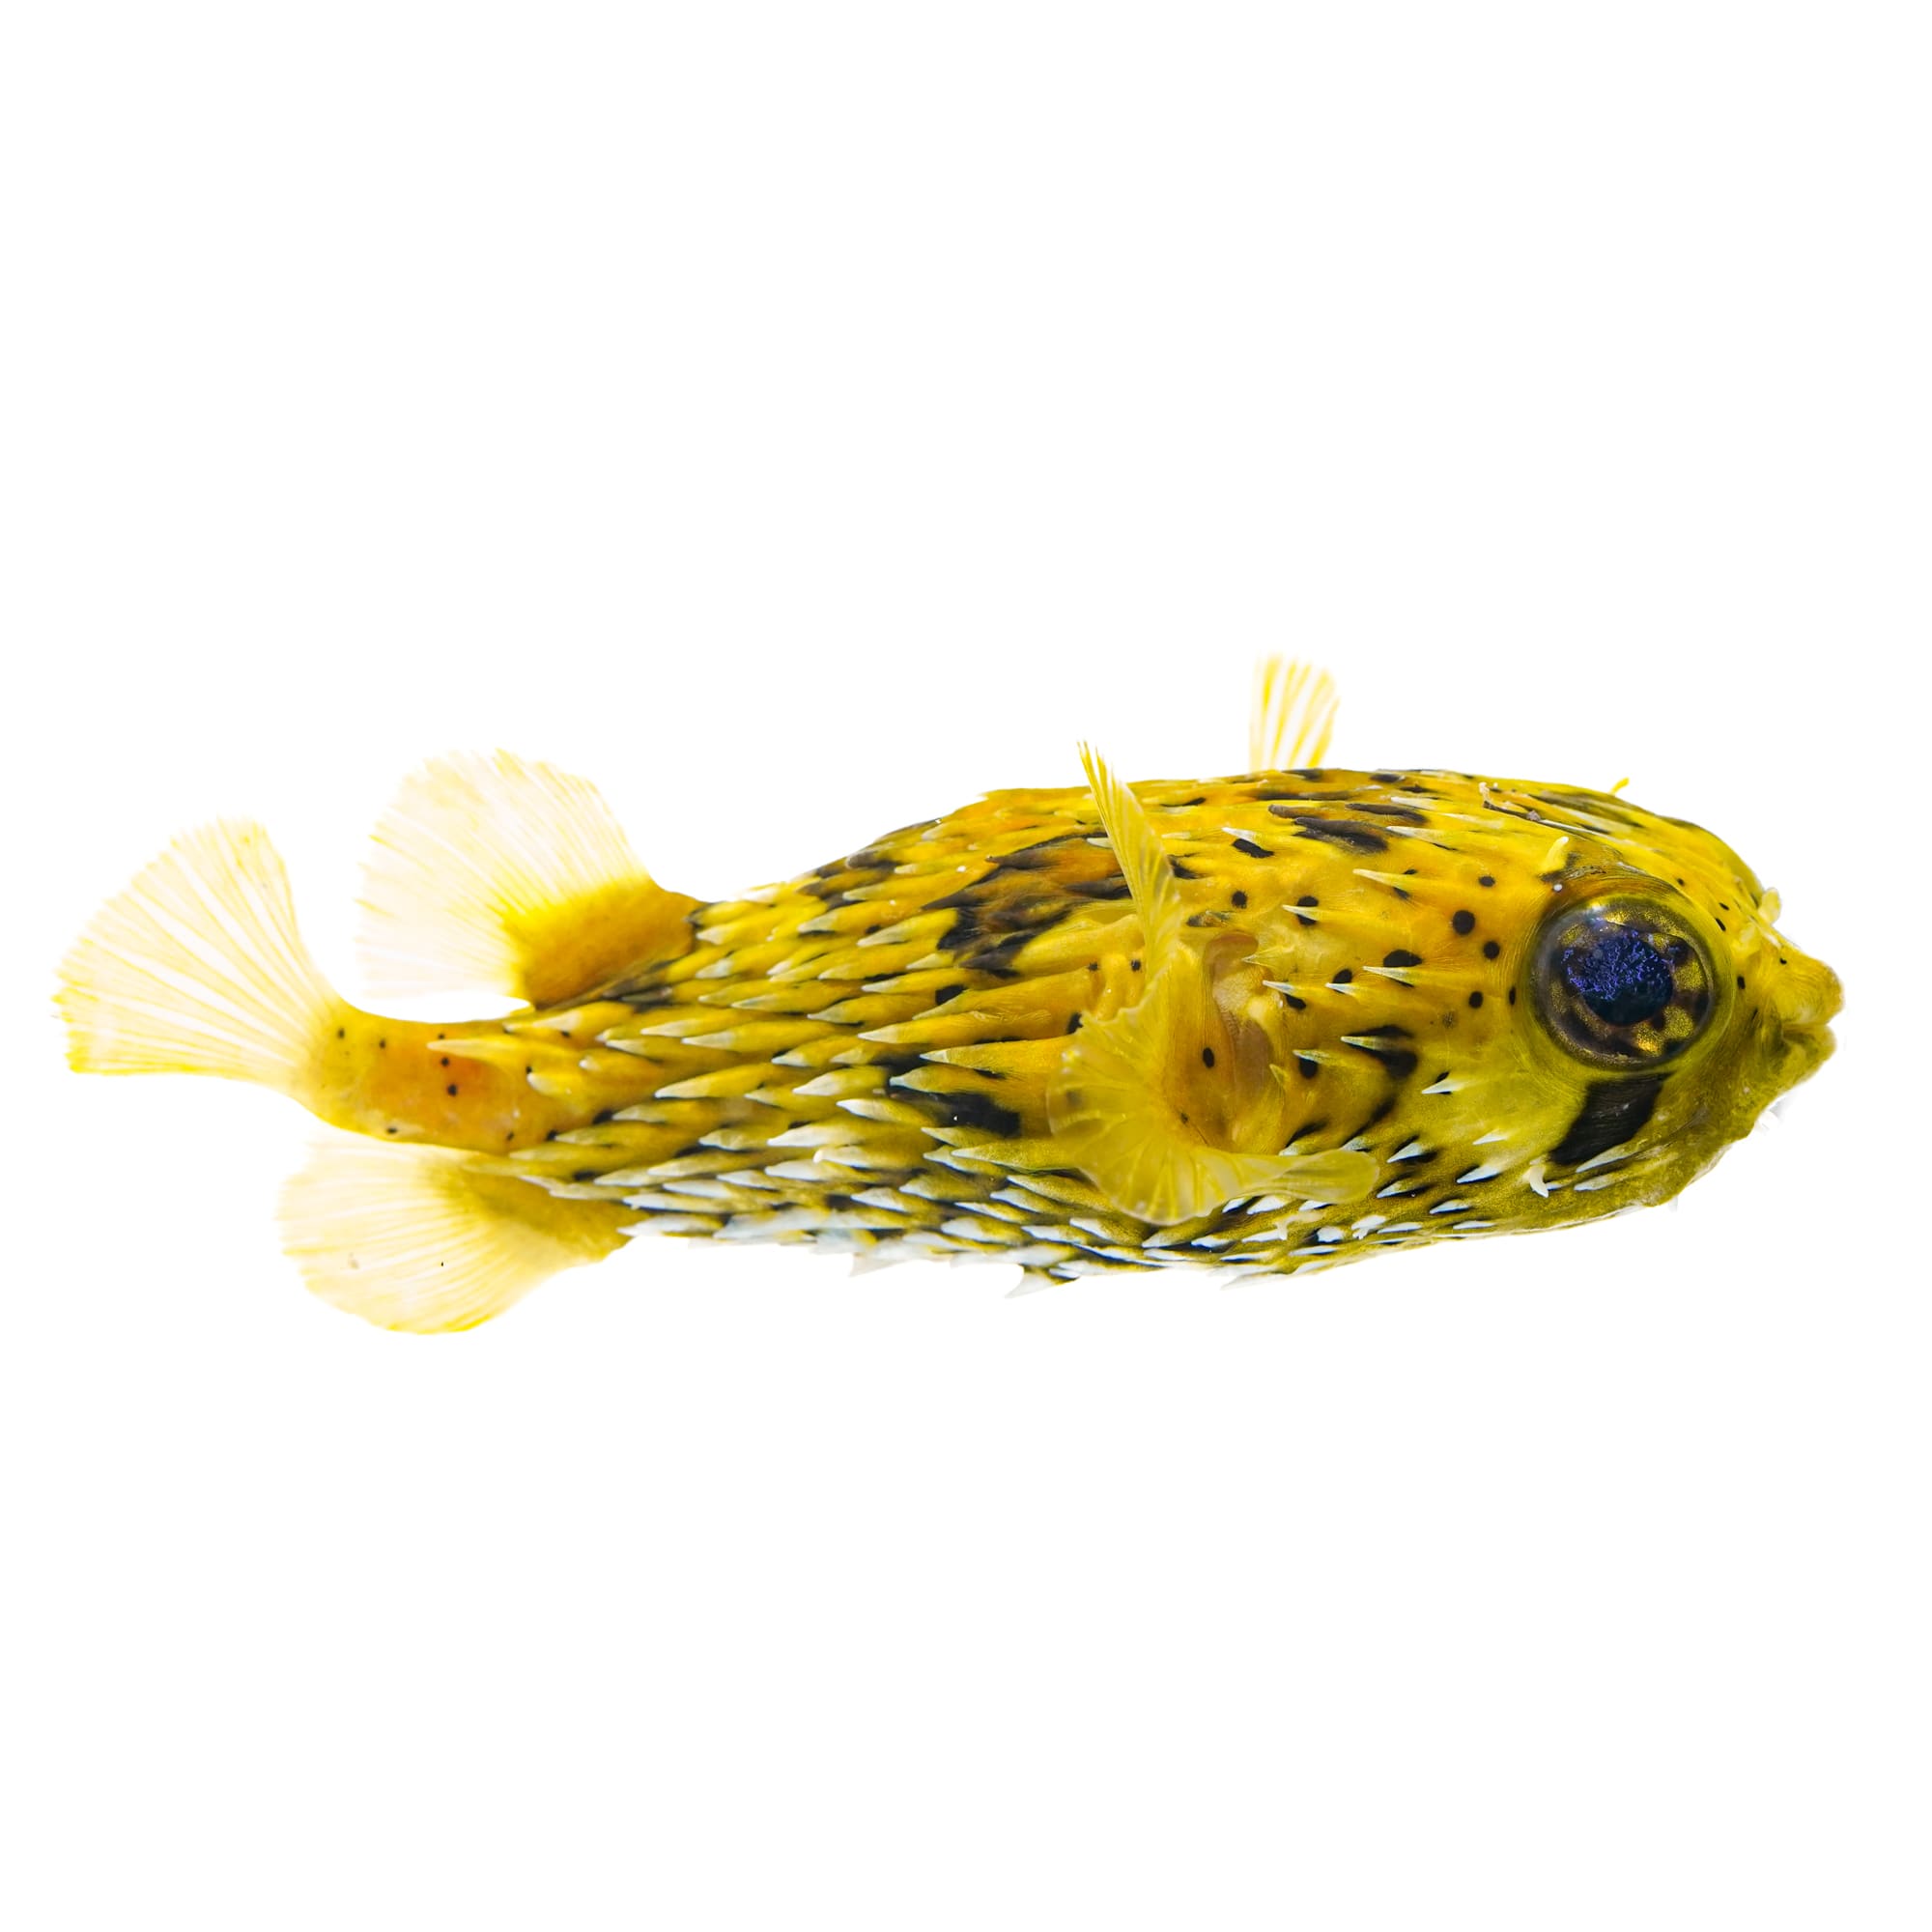 Freshwater Puffer Fish Facts | lupon.gov.ph